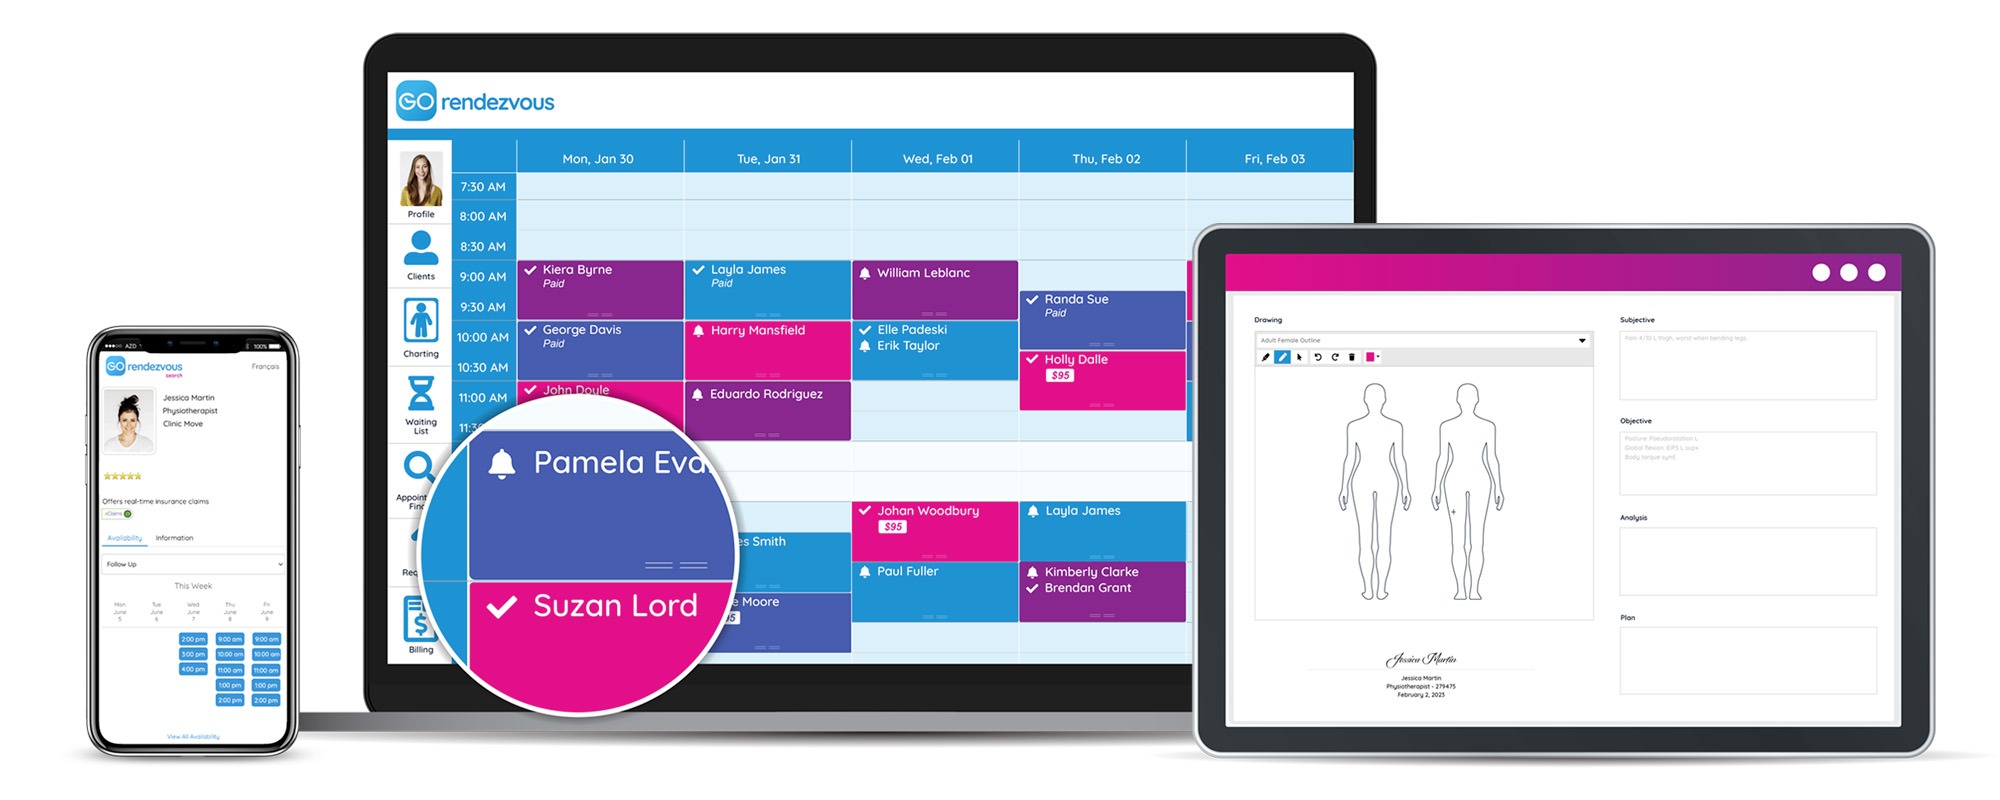 A view of a occupational therapist's GOrendezvous schedule on different devices